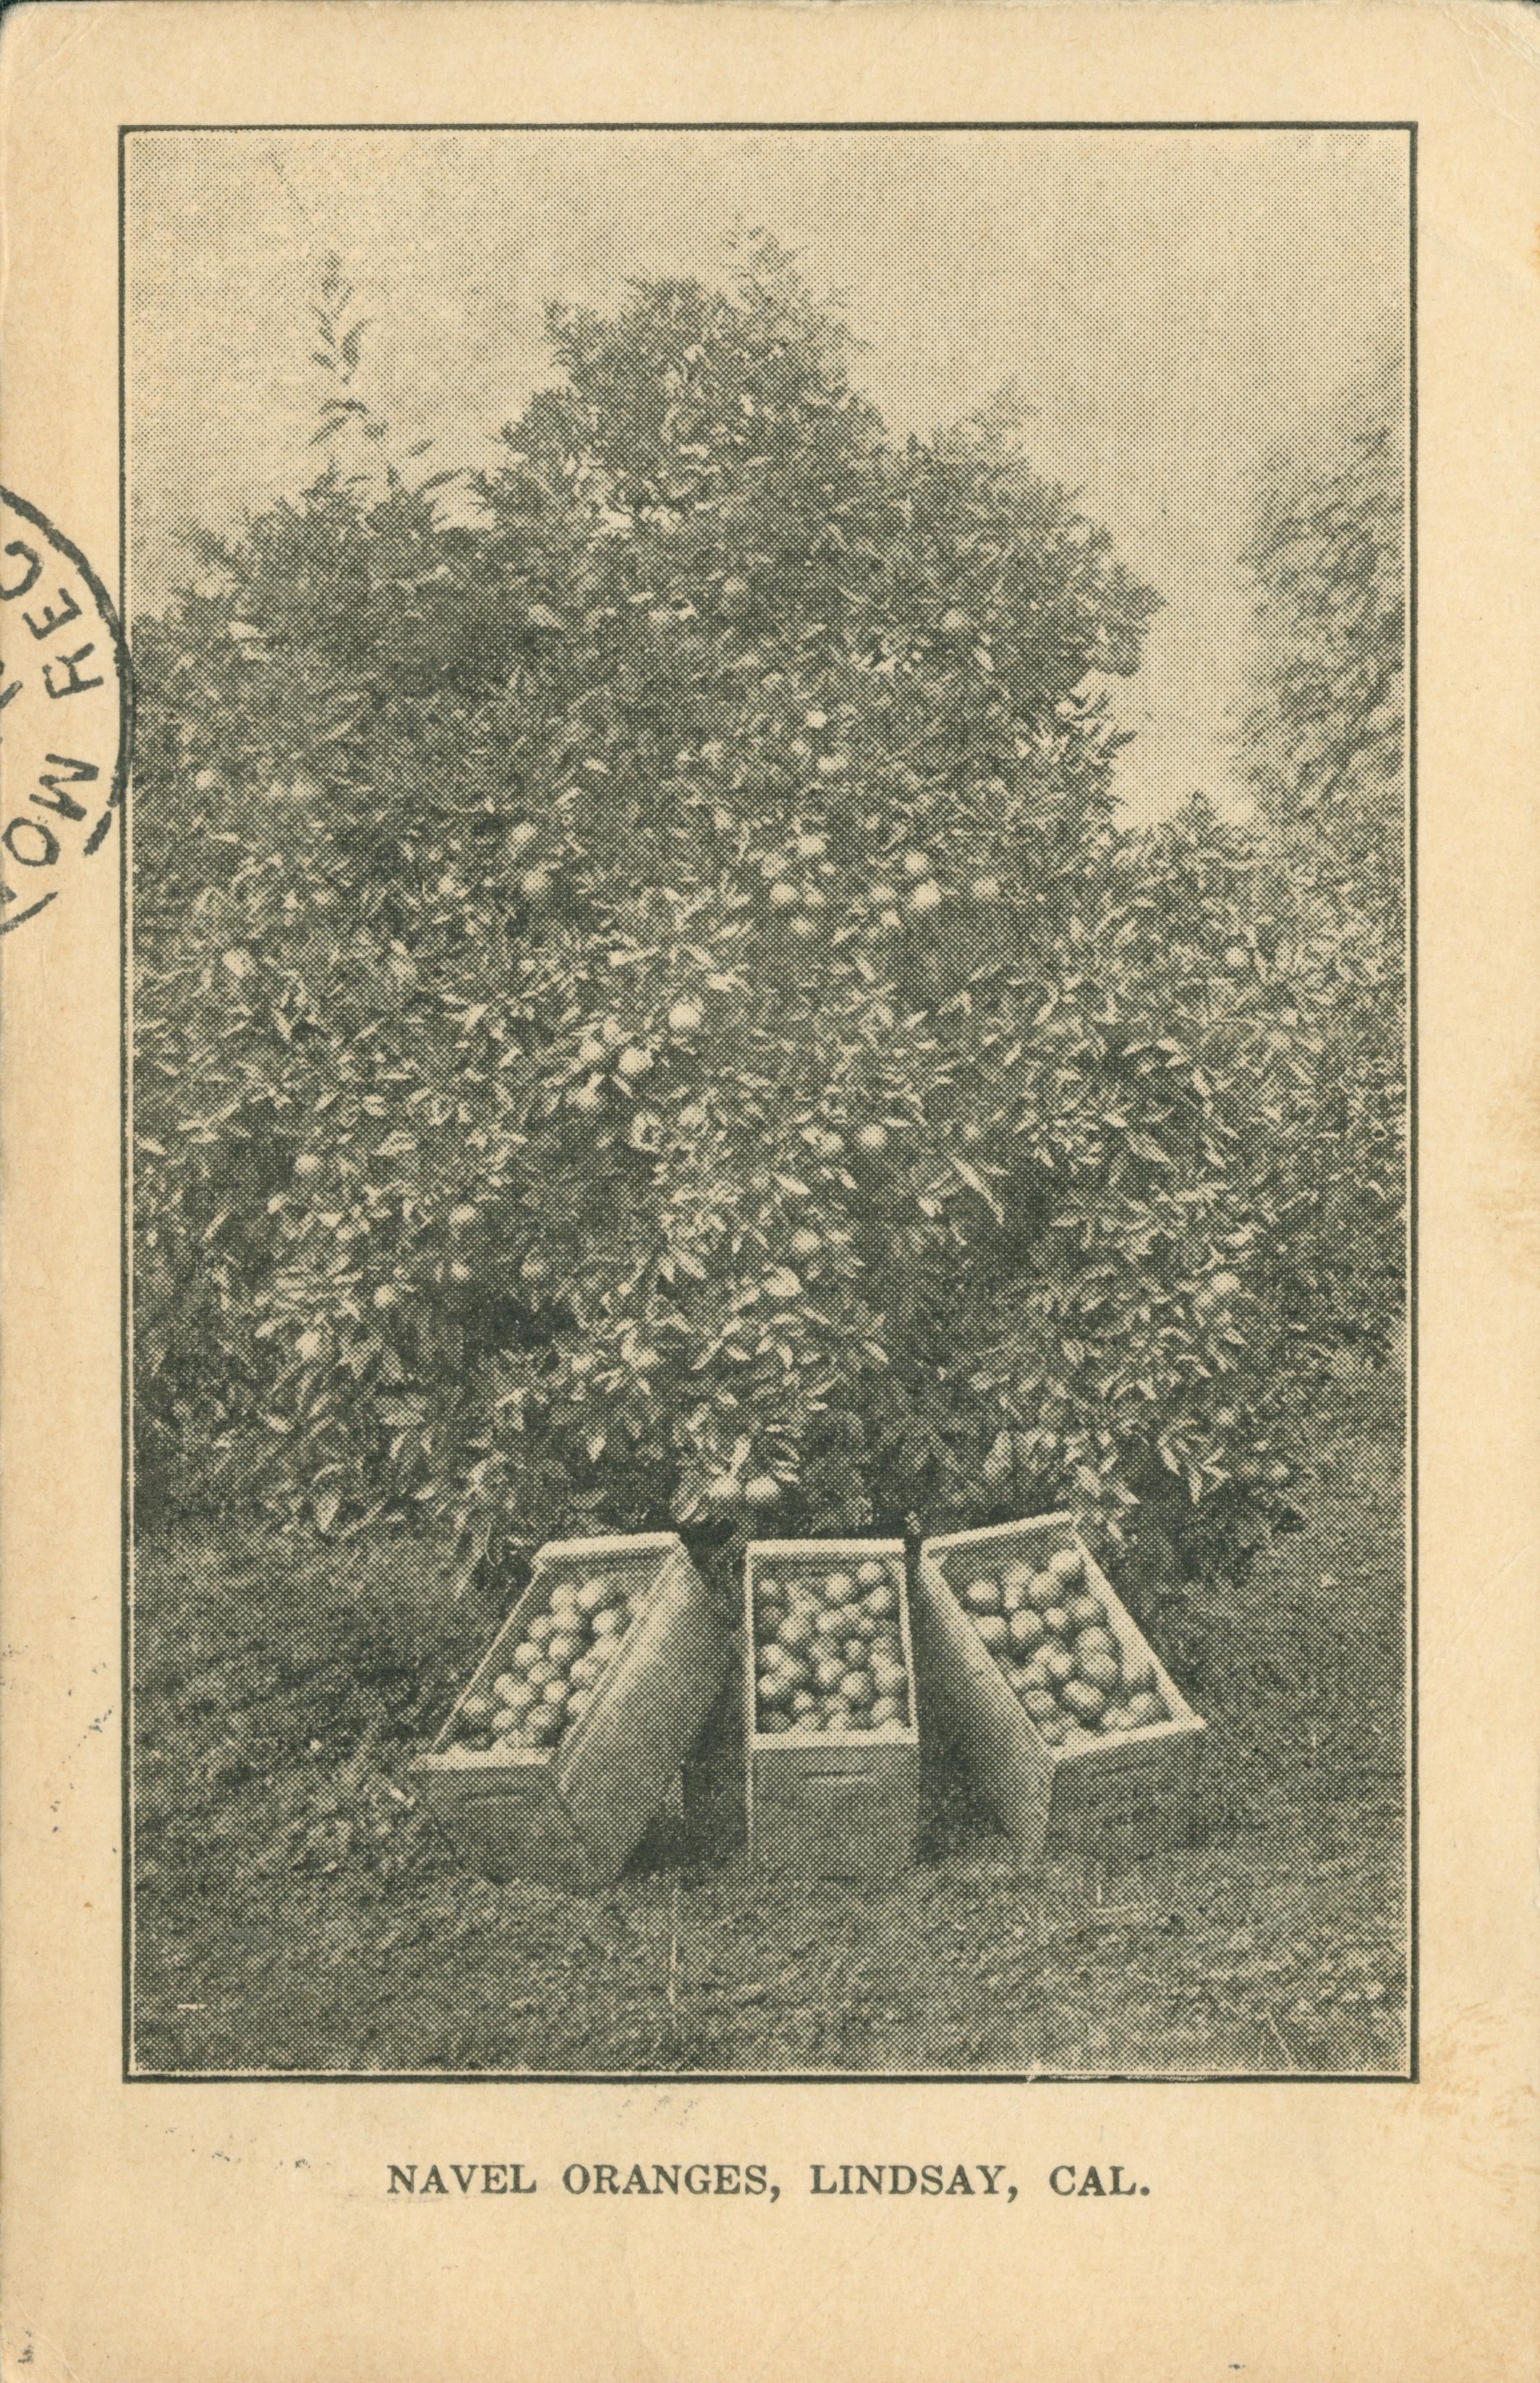 Shows an orange tree with three crates of oranges resting below it